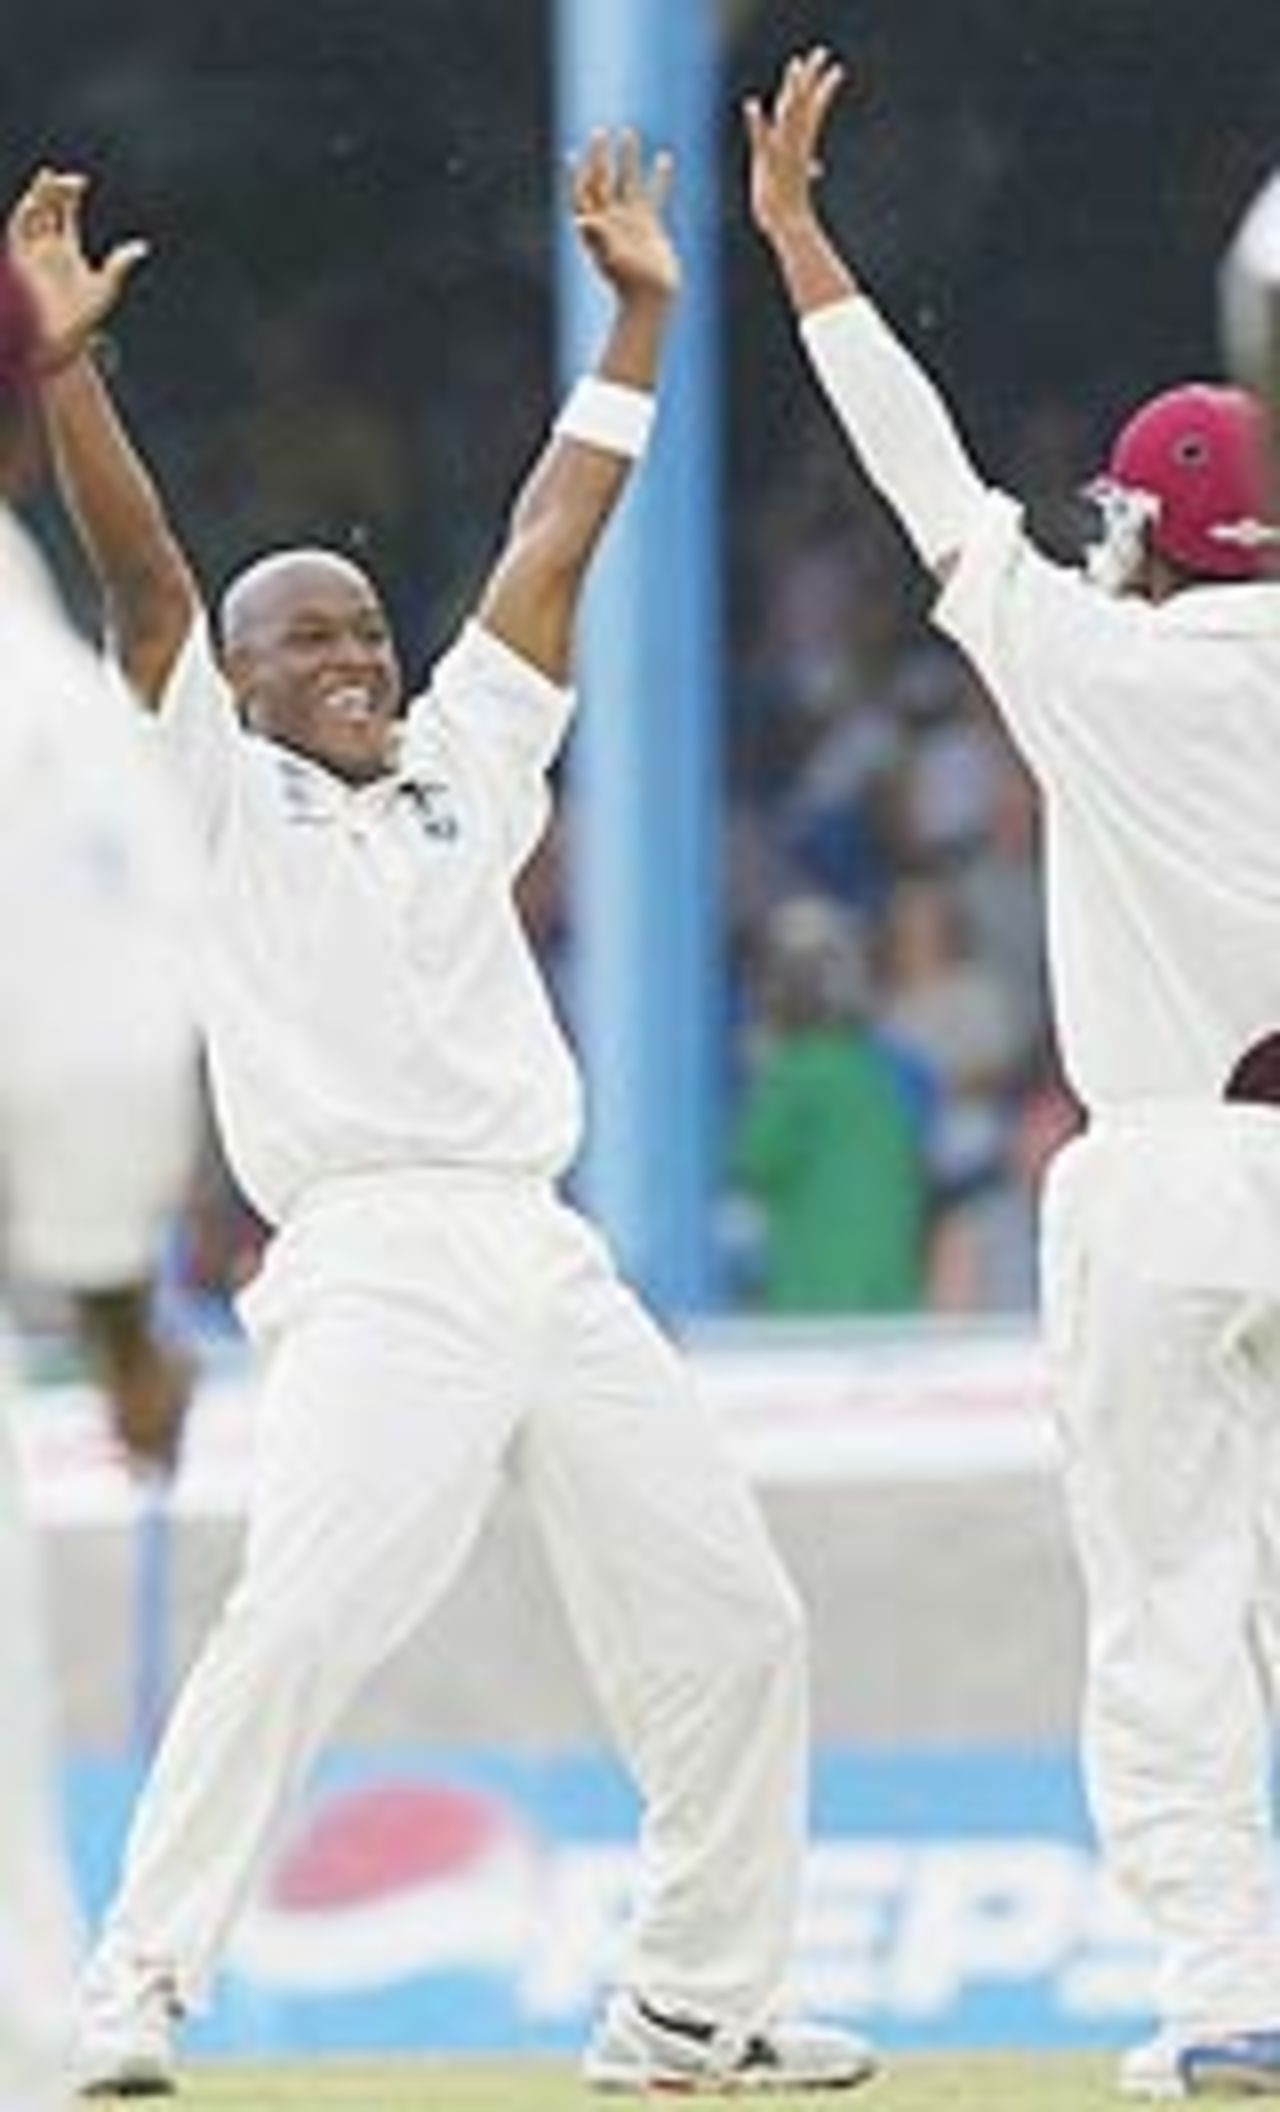 Tino Best celebrates the wicket of Marcus Trescothick, West Indies v England, 2nd test, Trinidad, 2nd day, 20th March, 2004